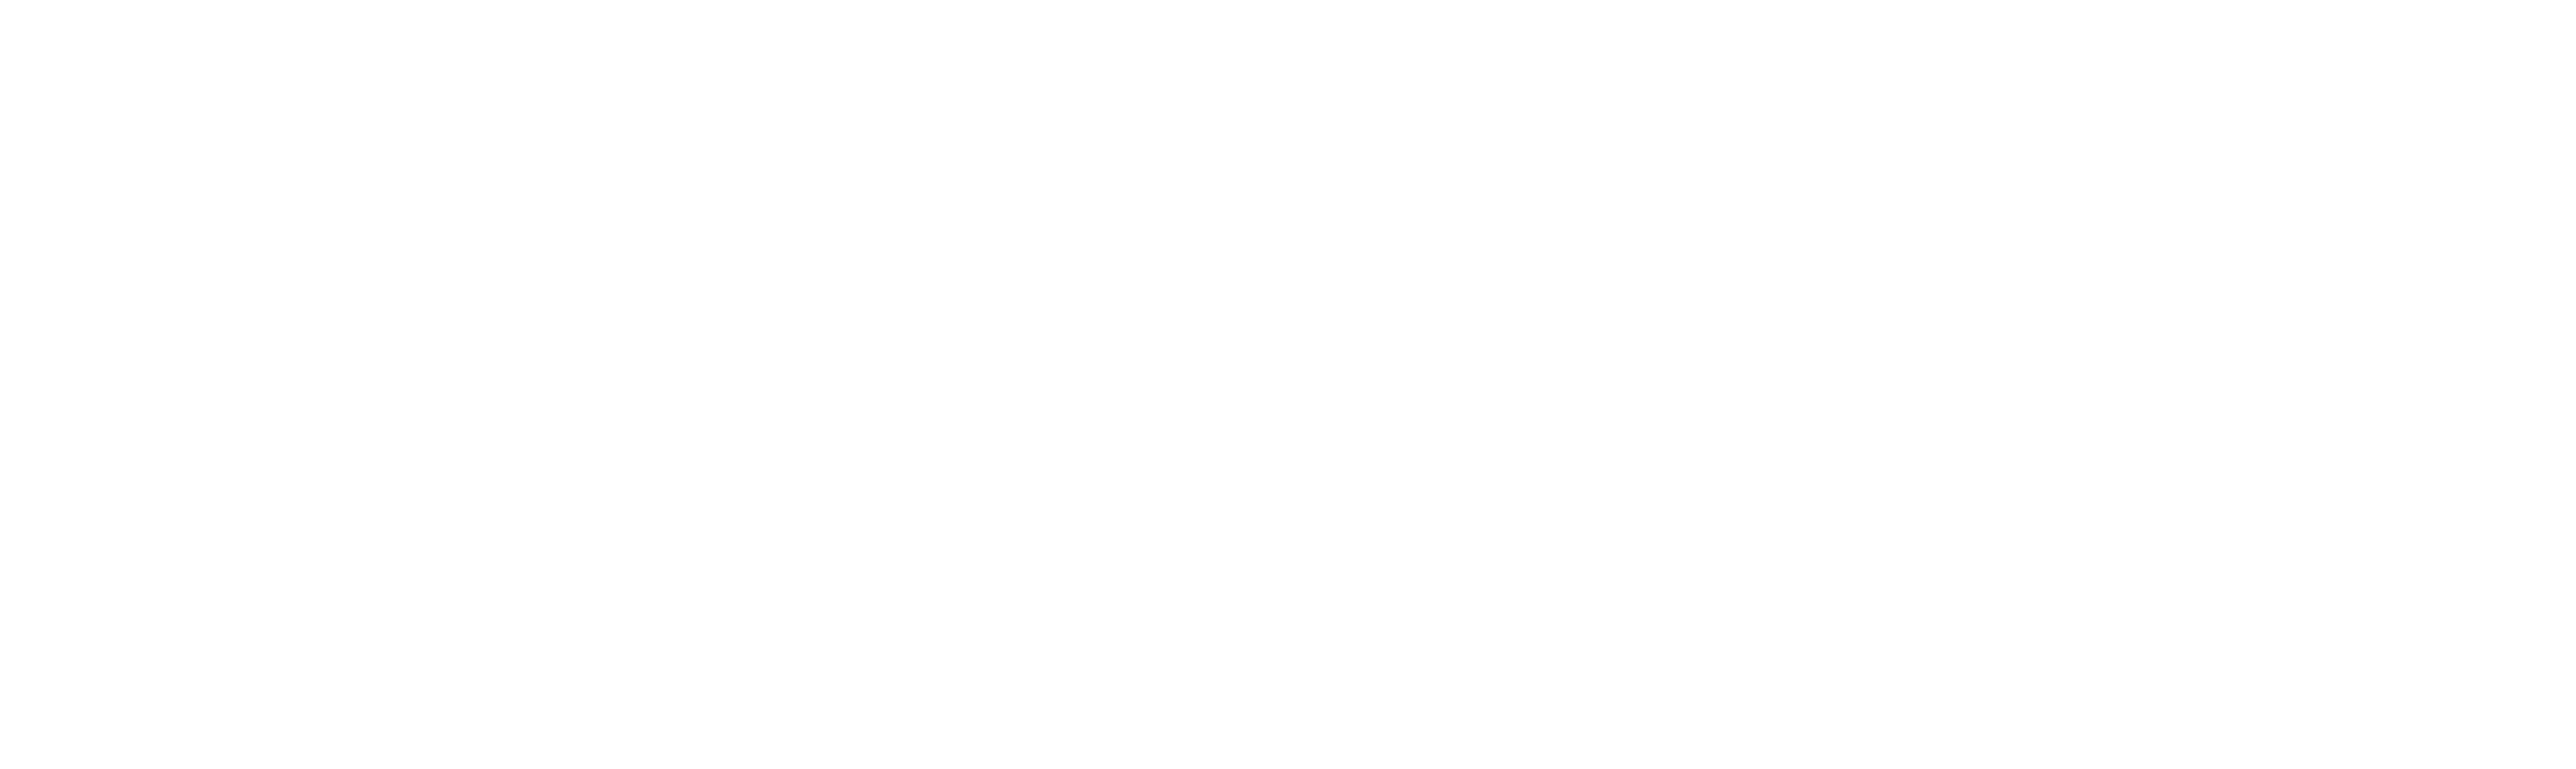 Part of the Brown&Brown Team